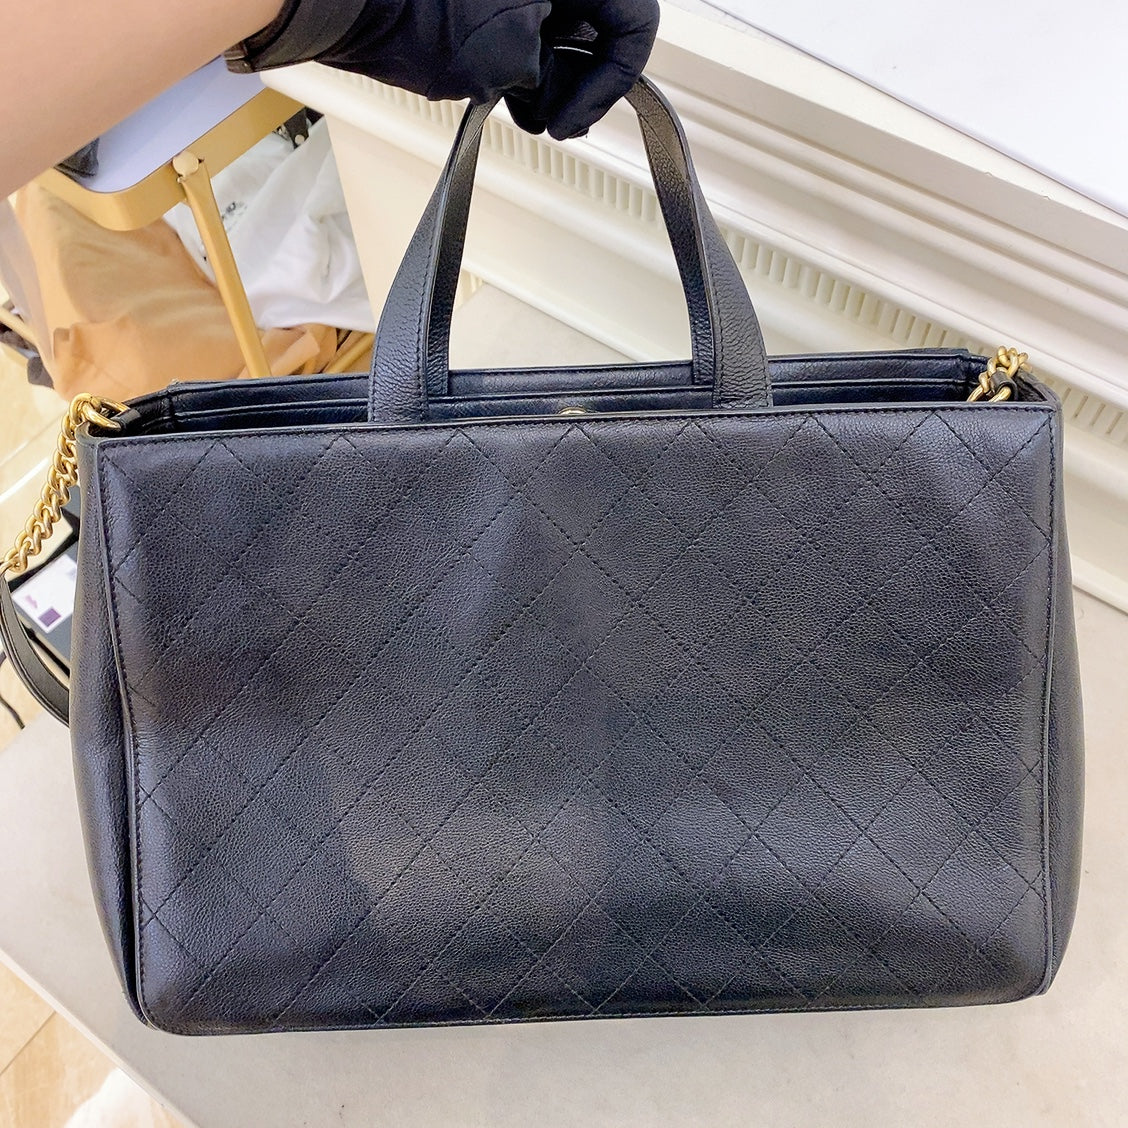 Chanel Black Quilted Caviar Leather Straight Line Tote Bag